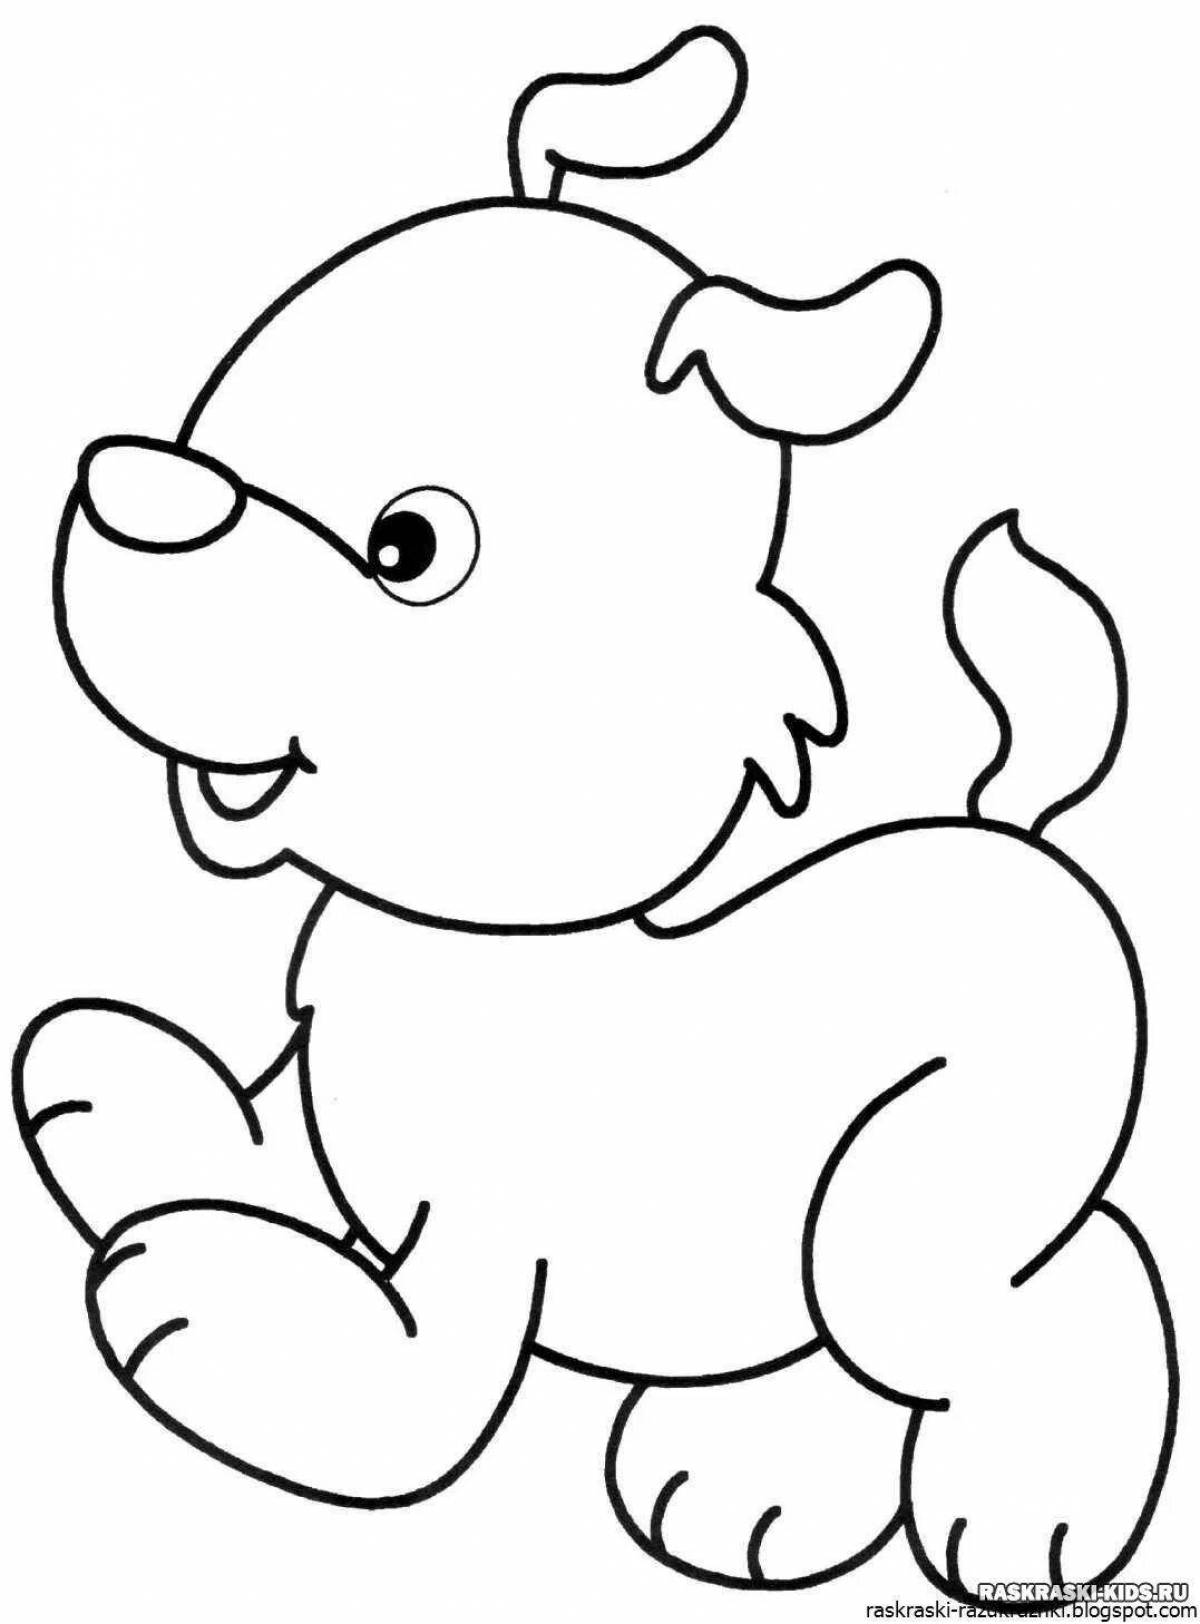 Color-frenzy coloring page for a 3 year old